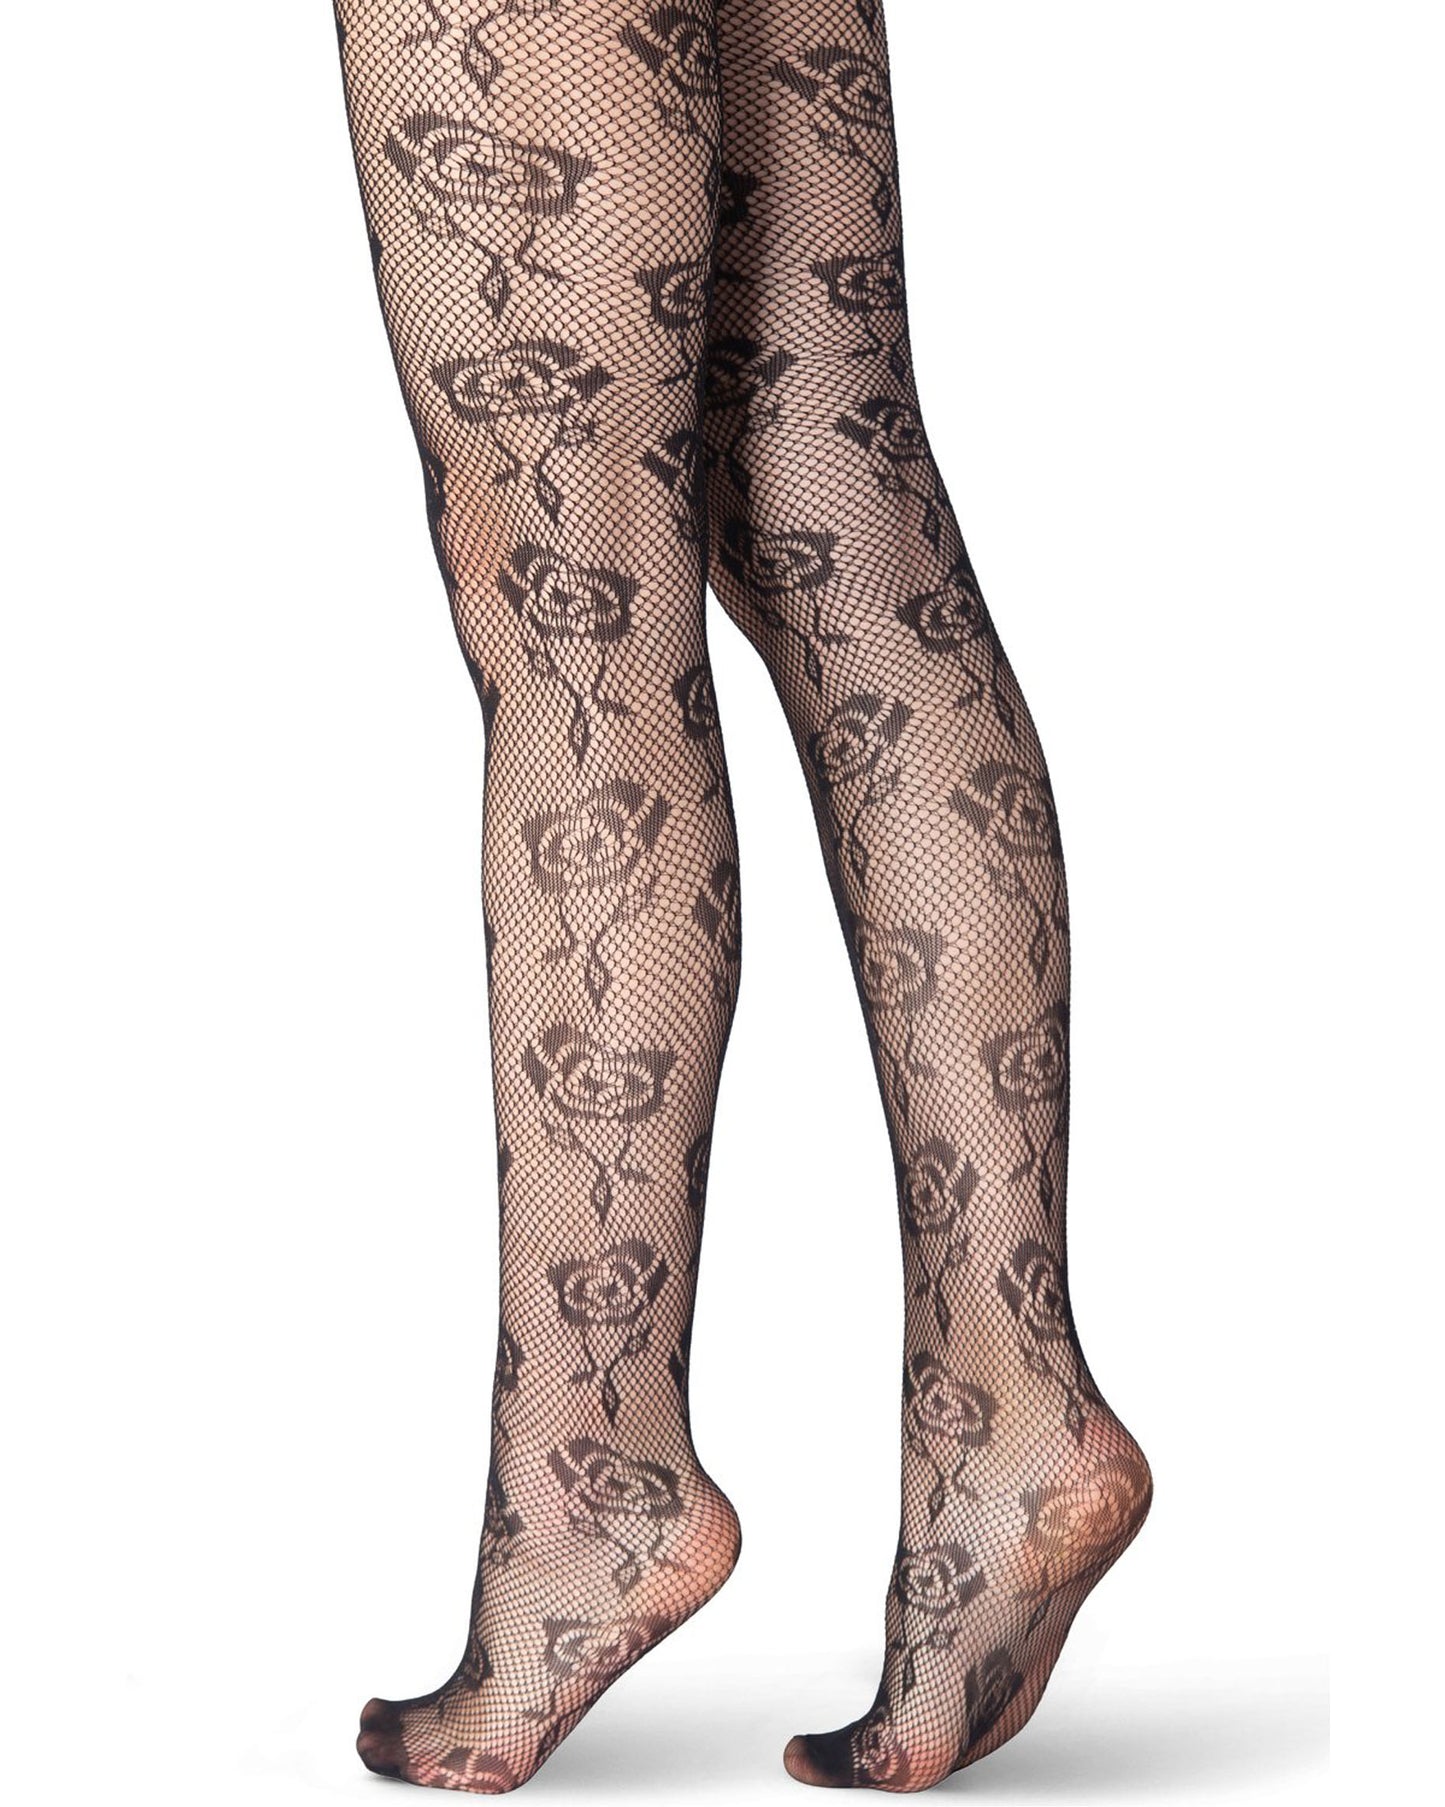 Emilio Cavallini Tiny Roses Tights - Black openwork fishnet tights with an all over roses lace style pattern, seamless body and reinforced micro-mesh reinforced toe.